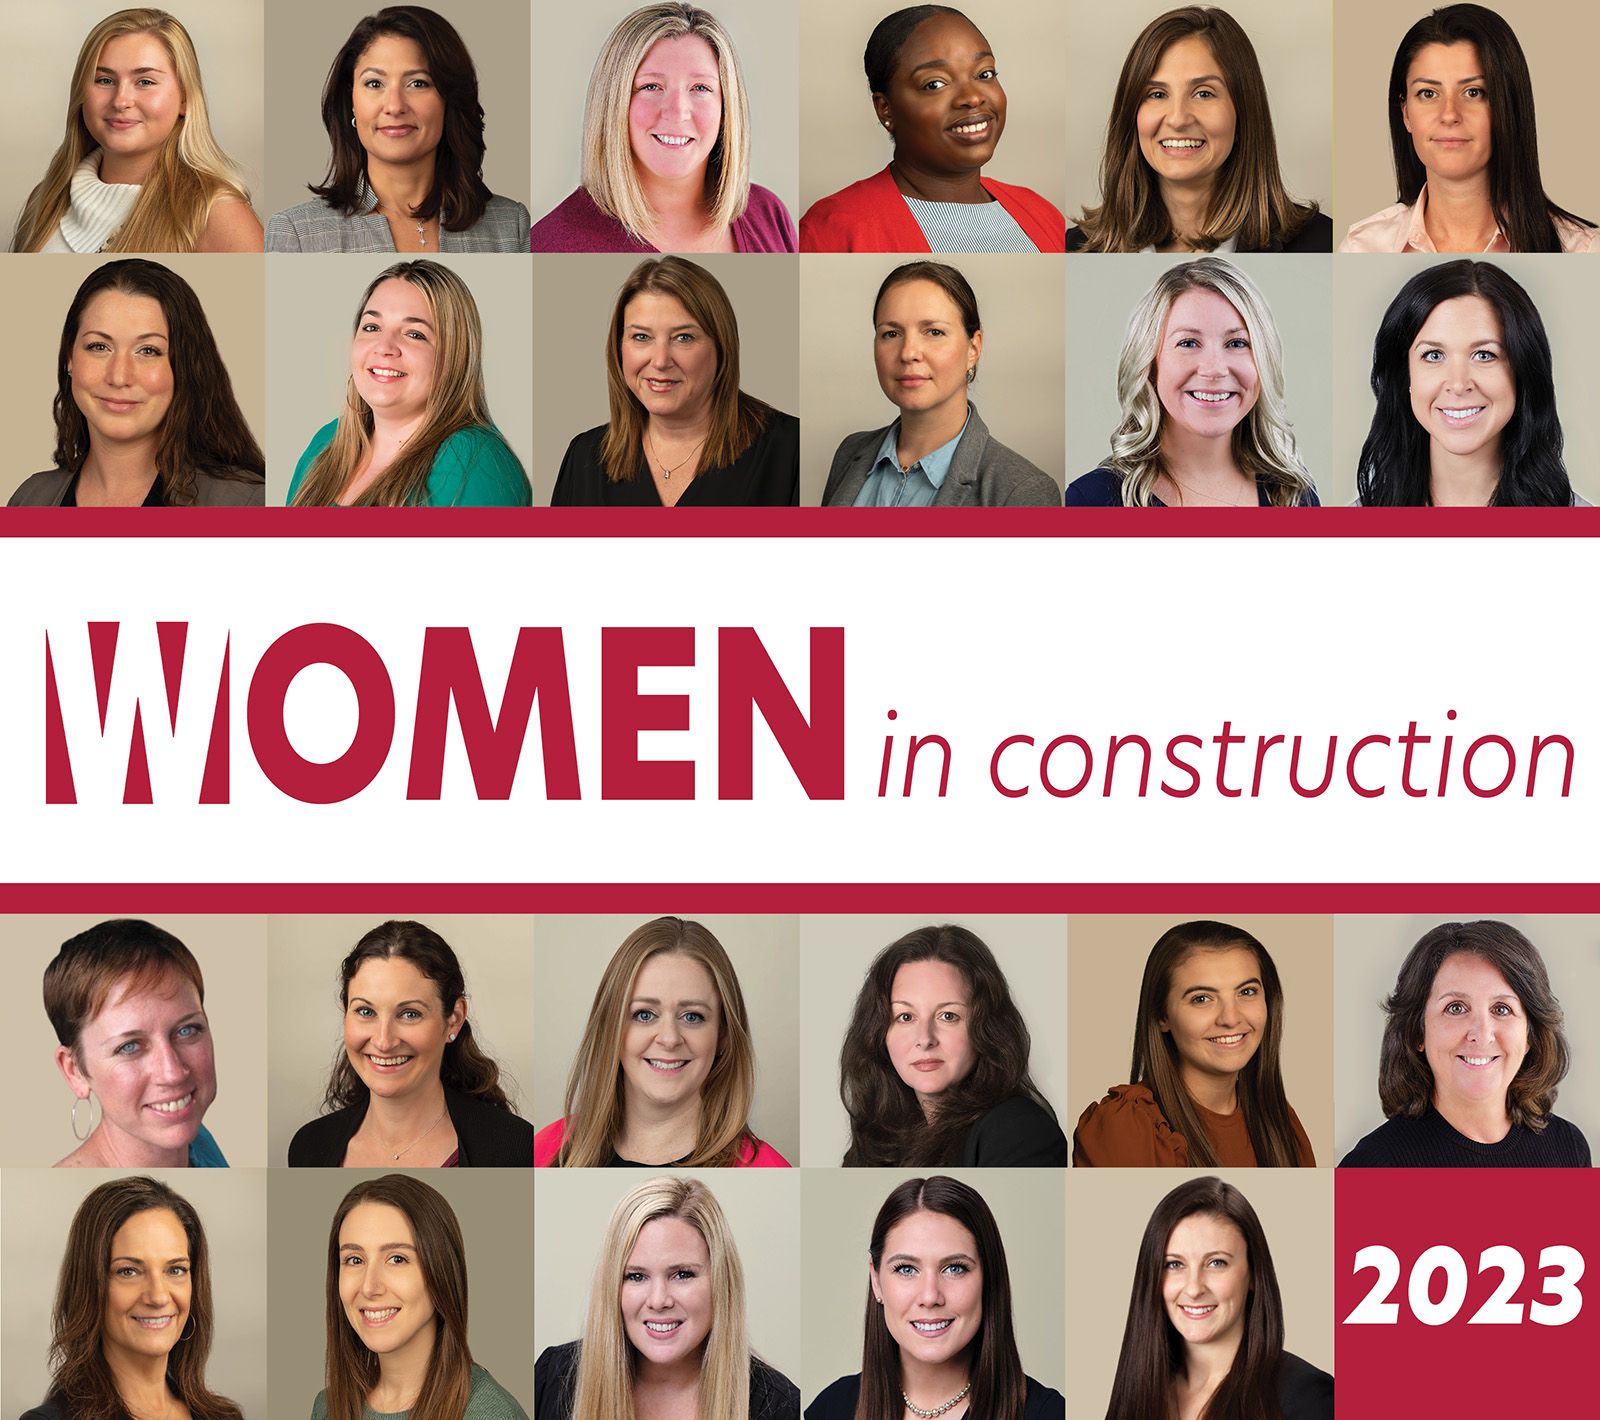 Wise Words from Women in Construction